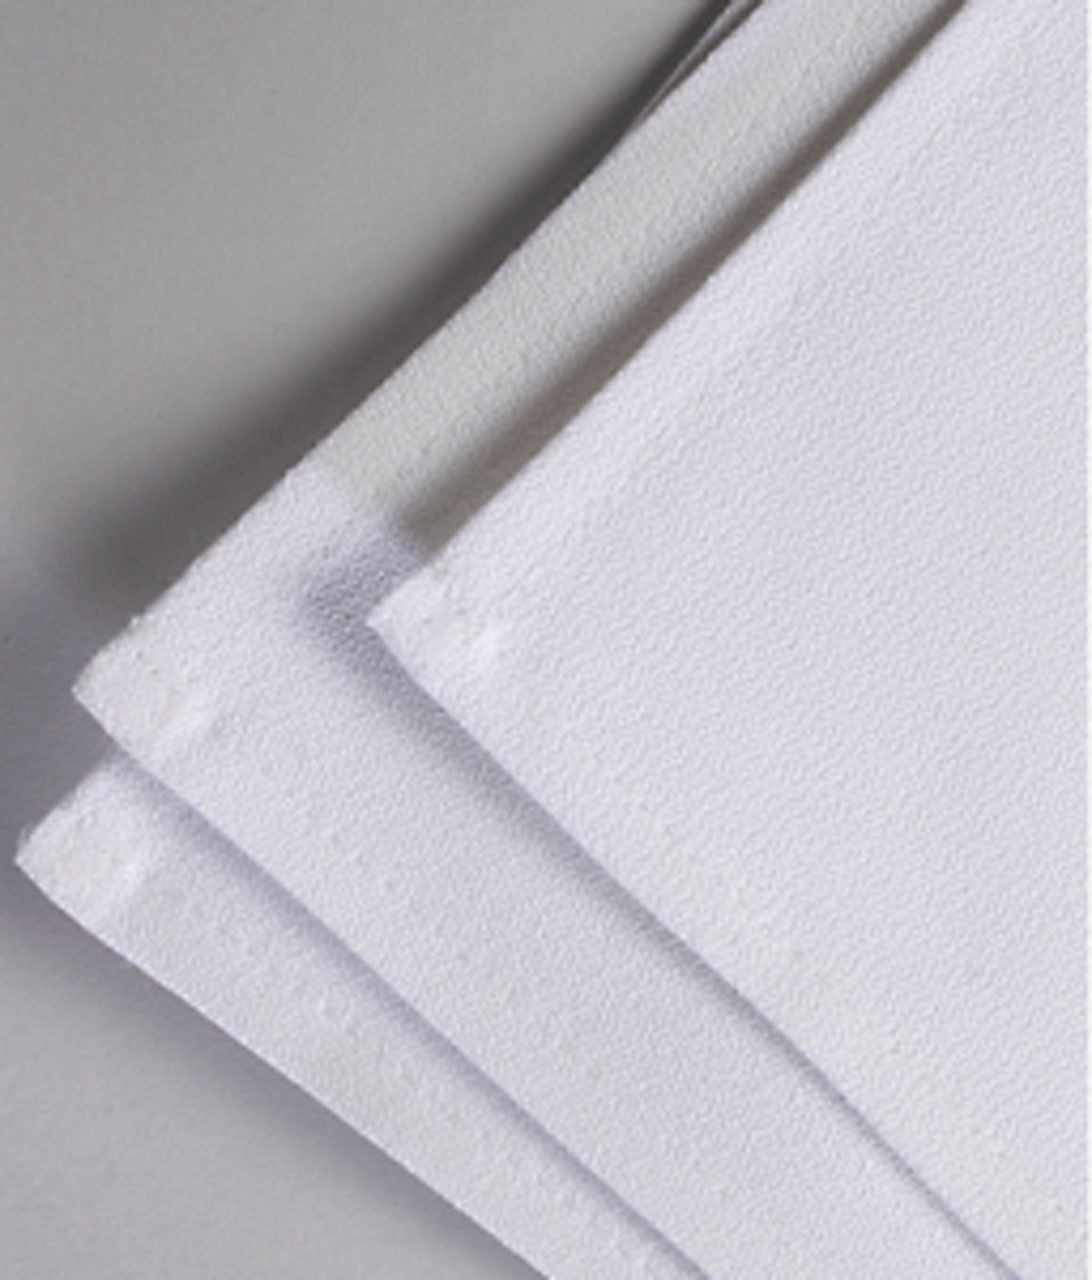 What are the key features of the Cotton Momie Linen Napkins?